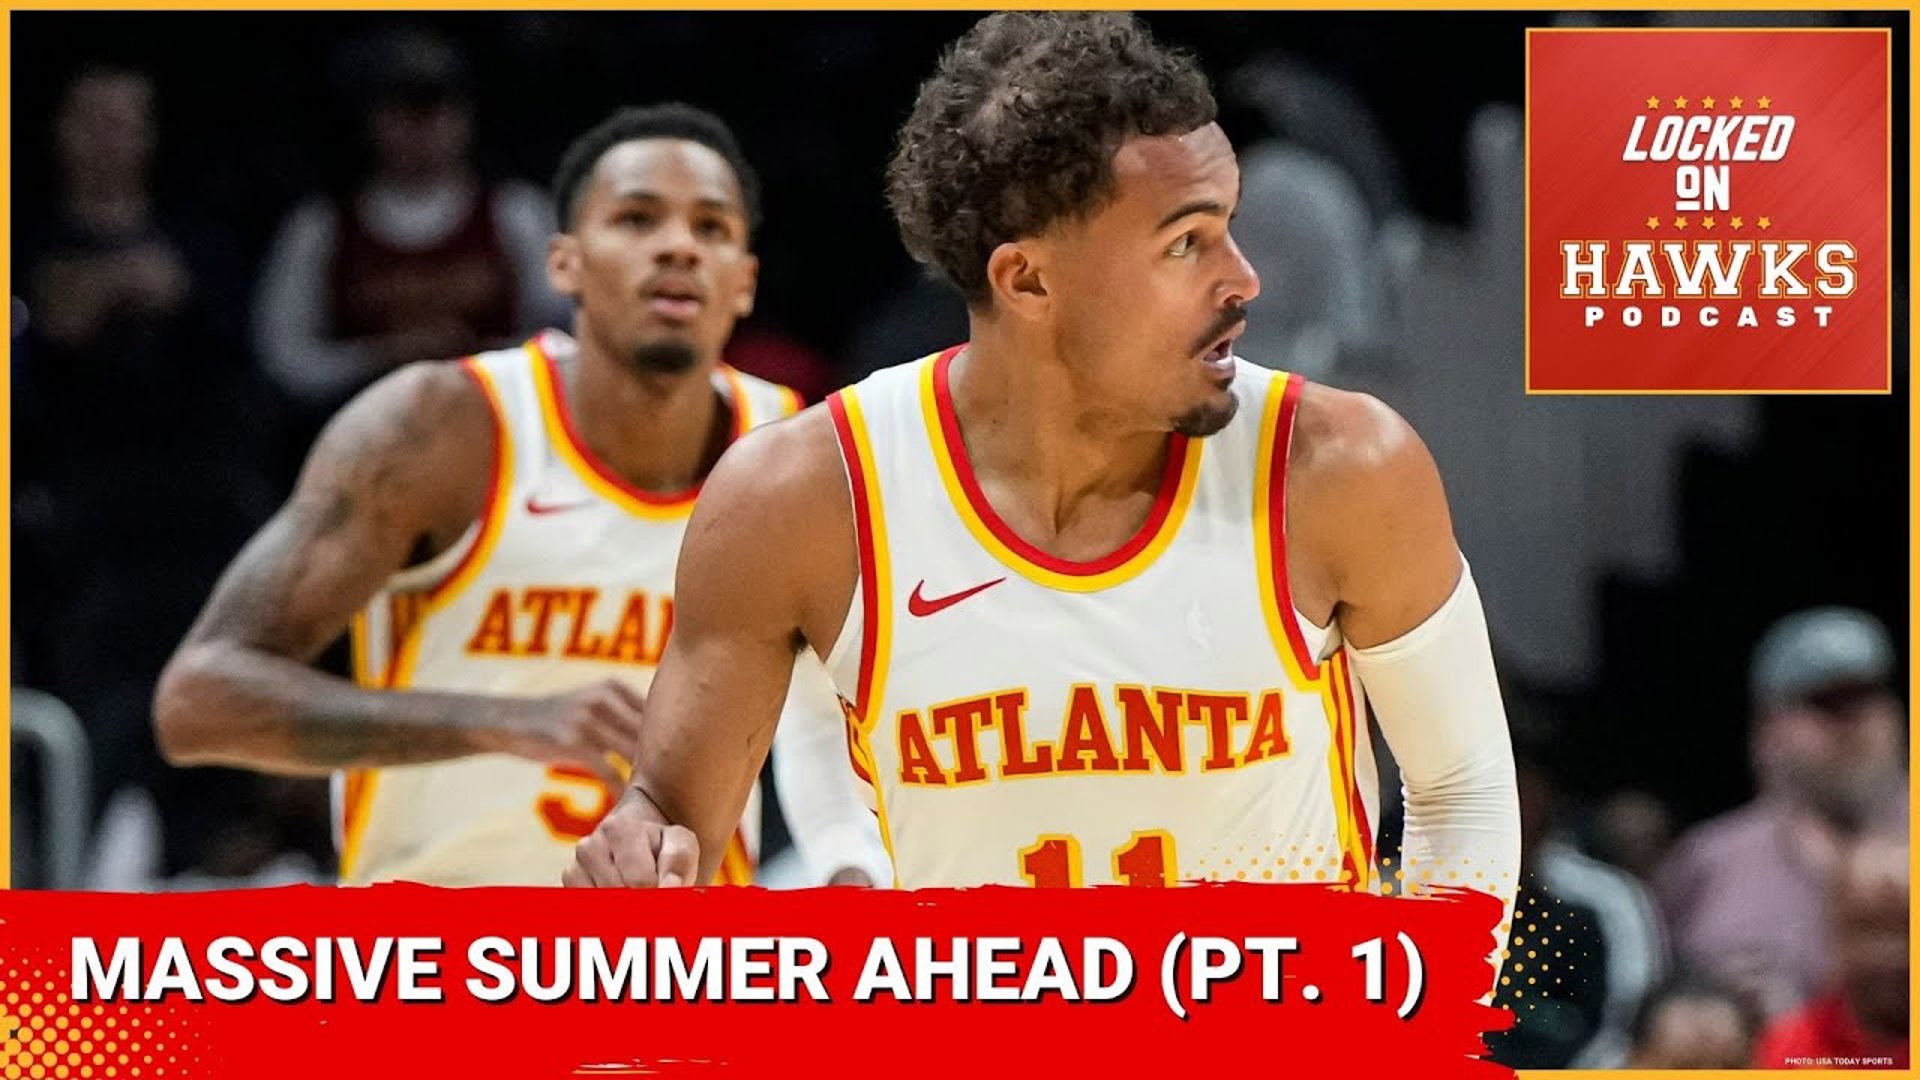 The show touches on the fallout from the Atlanta Hawks winning the 2024 NBA Draft Lottery